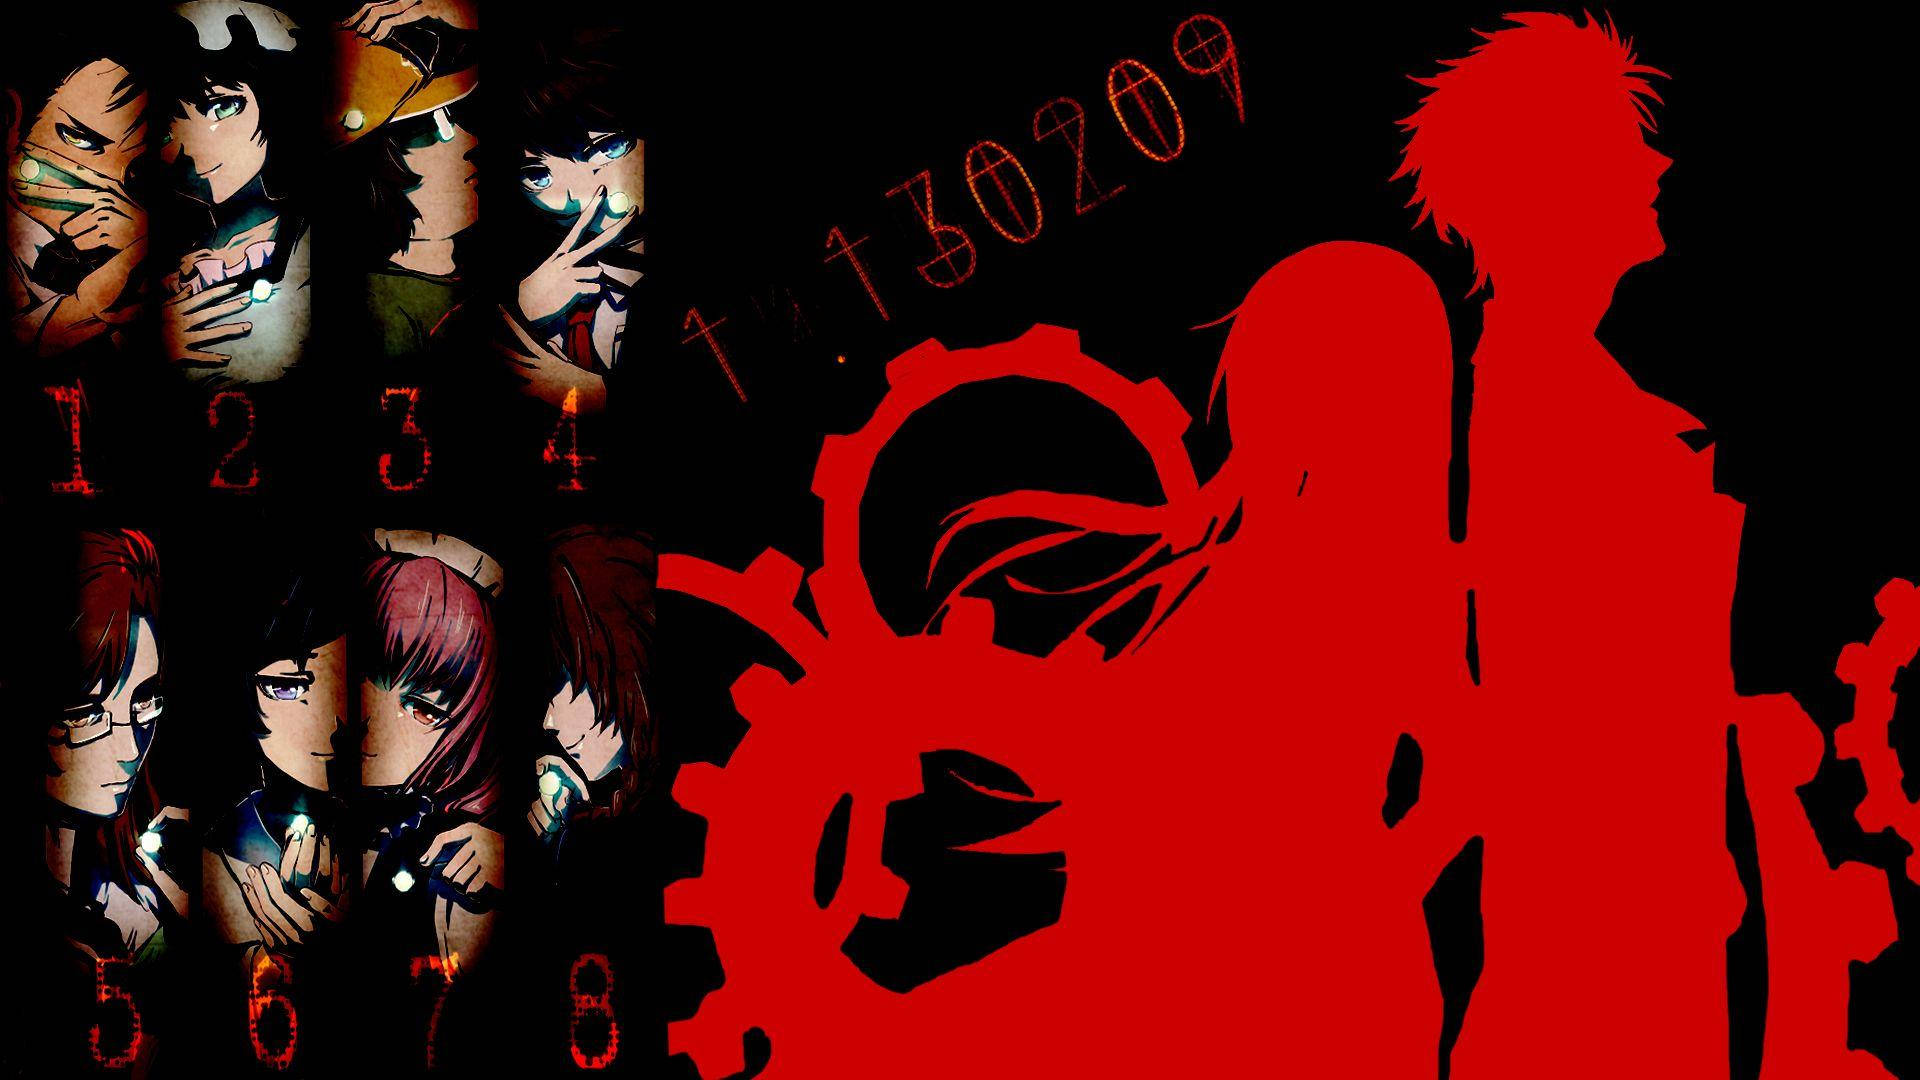 The silhouette of Okabe Rintaro and Makise Kurisu in the world of Steins Gate Wallpaper